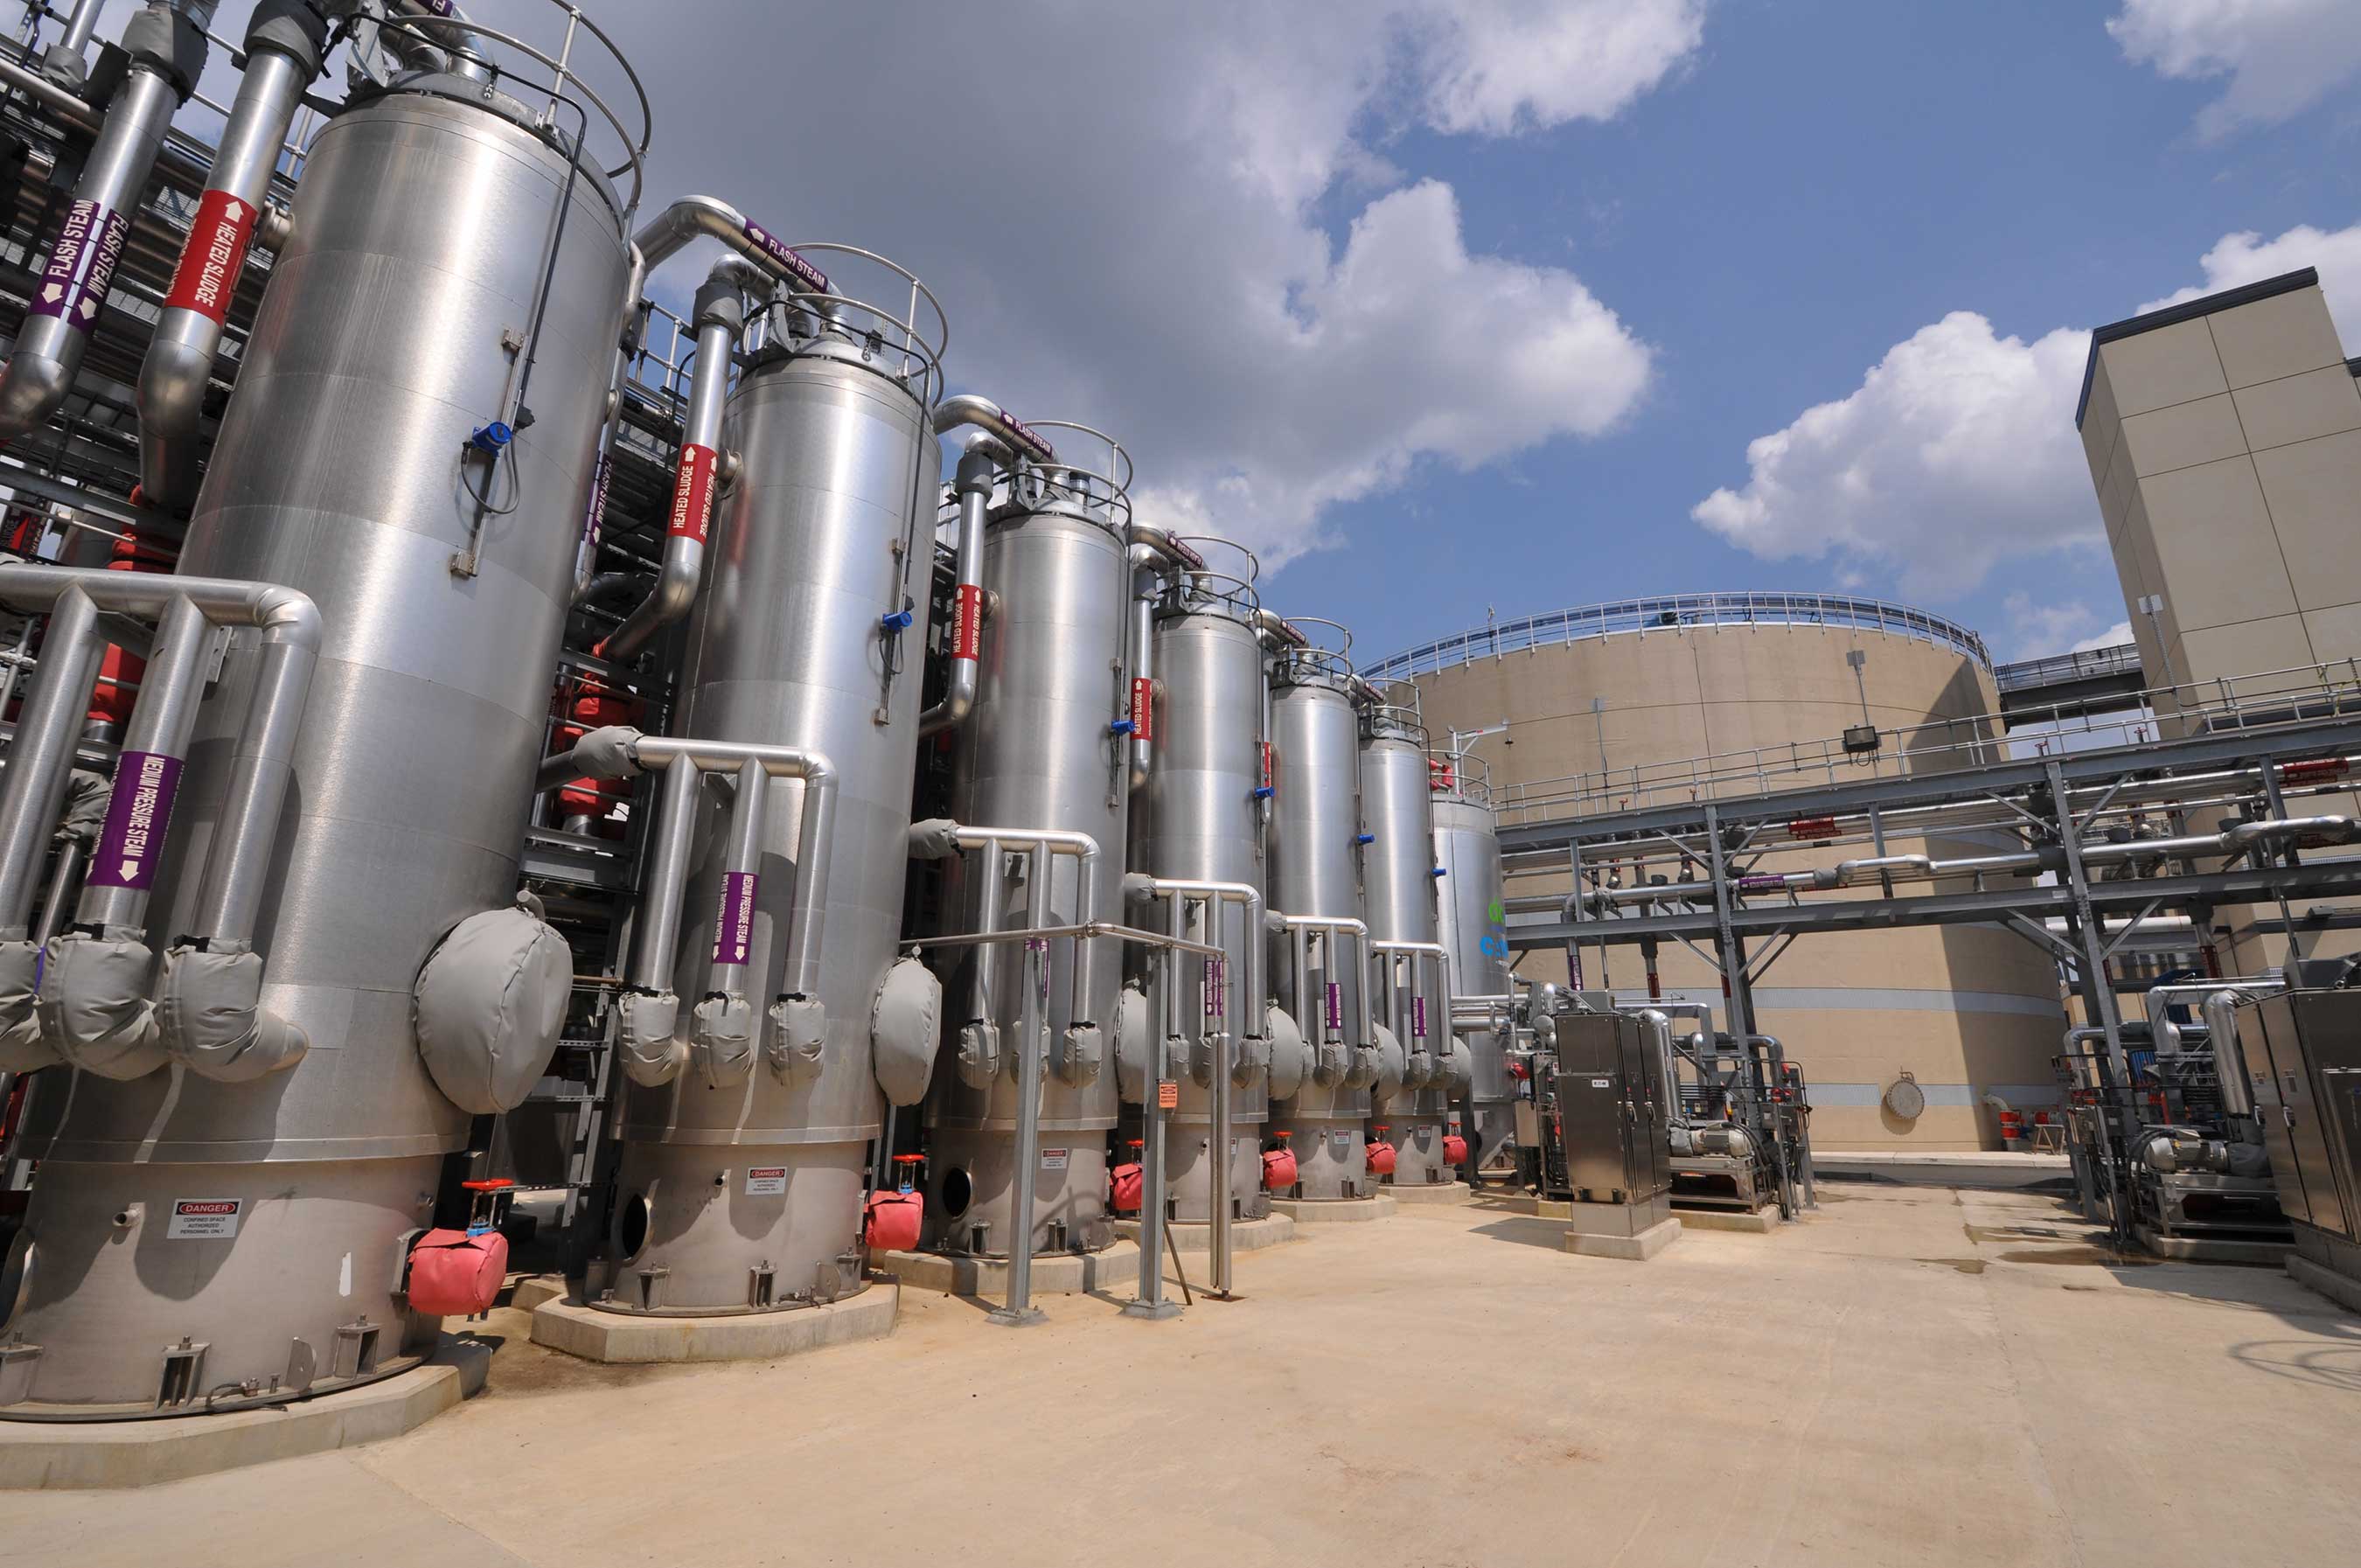 CAMBI thermal hydrolysis vessels in foreground, anaerobic digesters in the background.